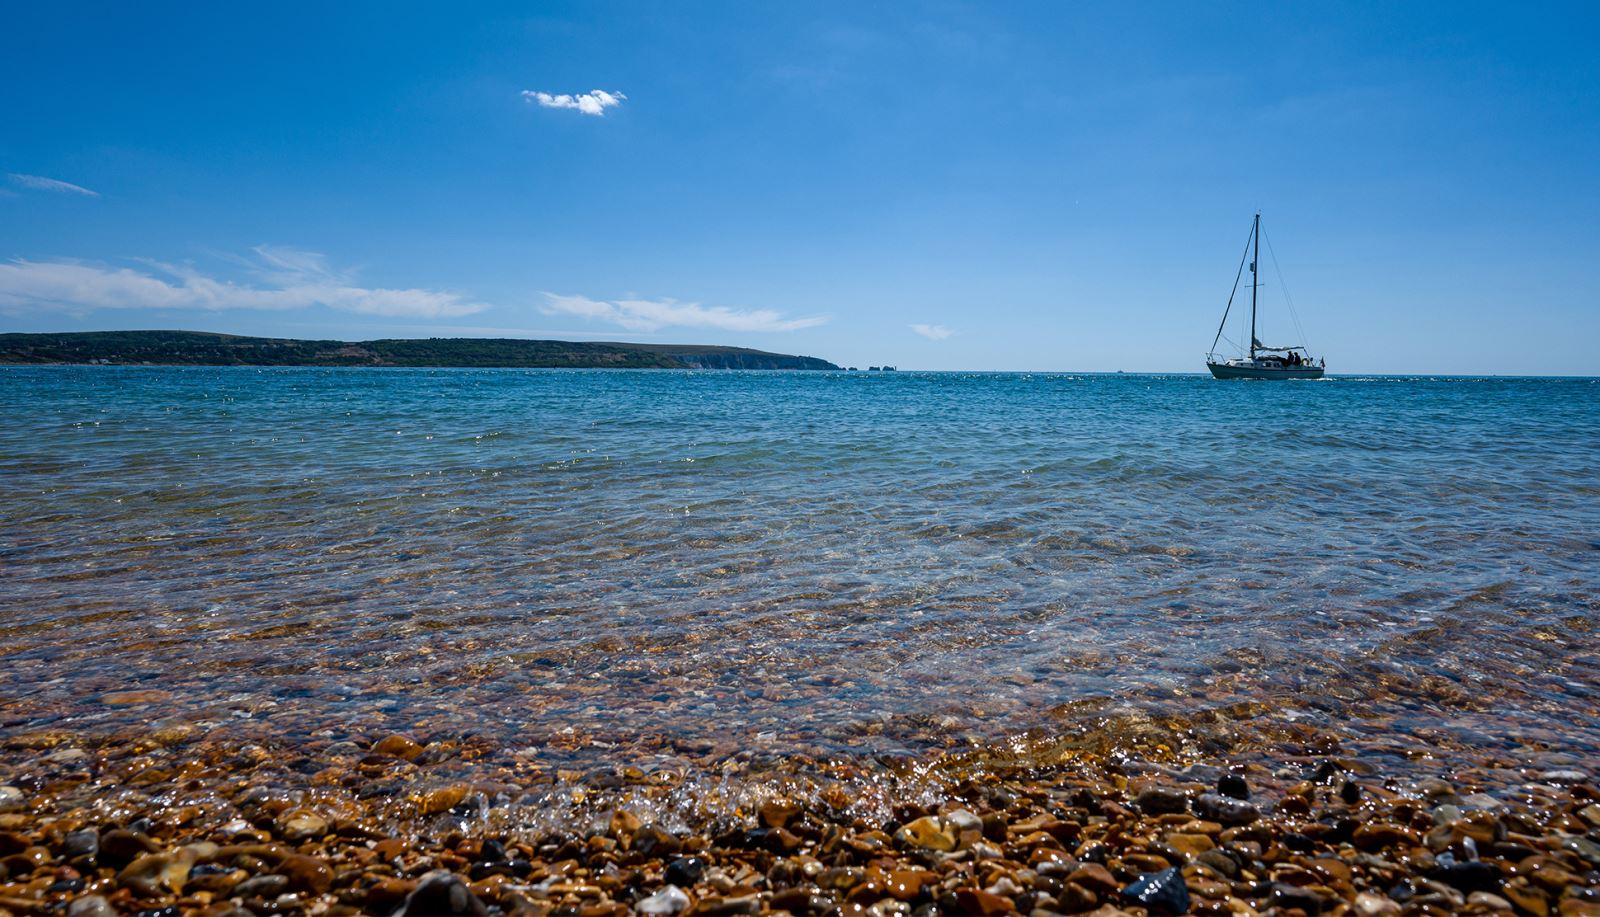 View of the Isle of Wight from Hurst Spit Beach